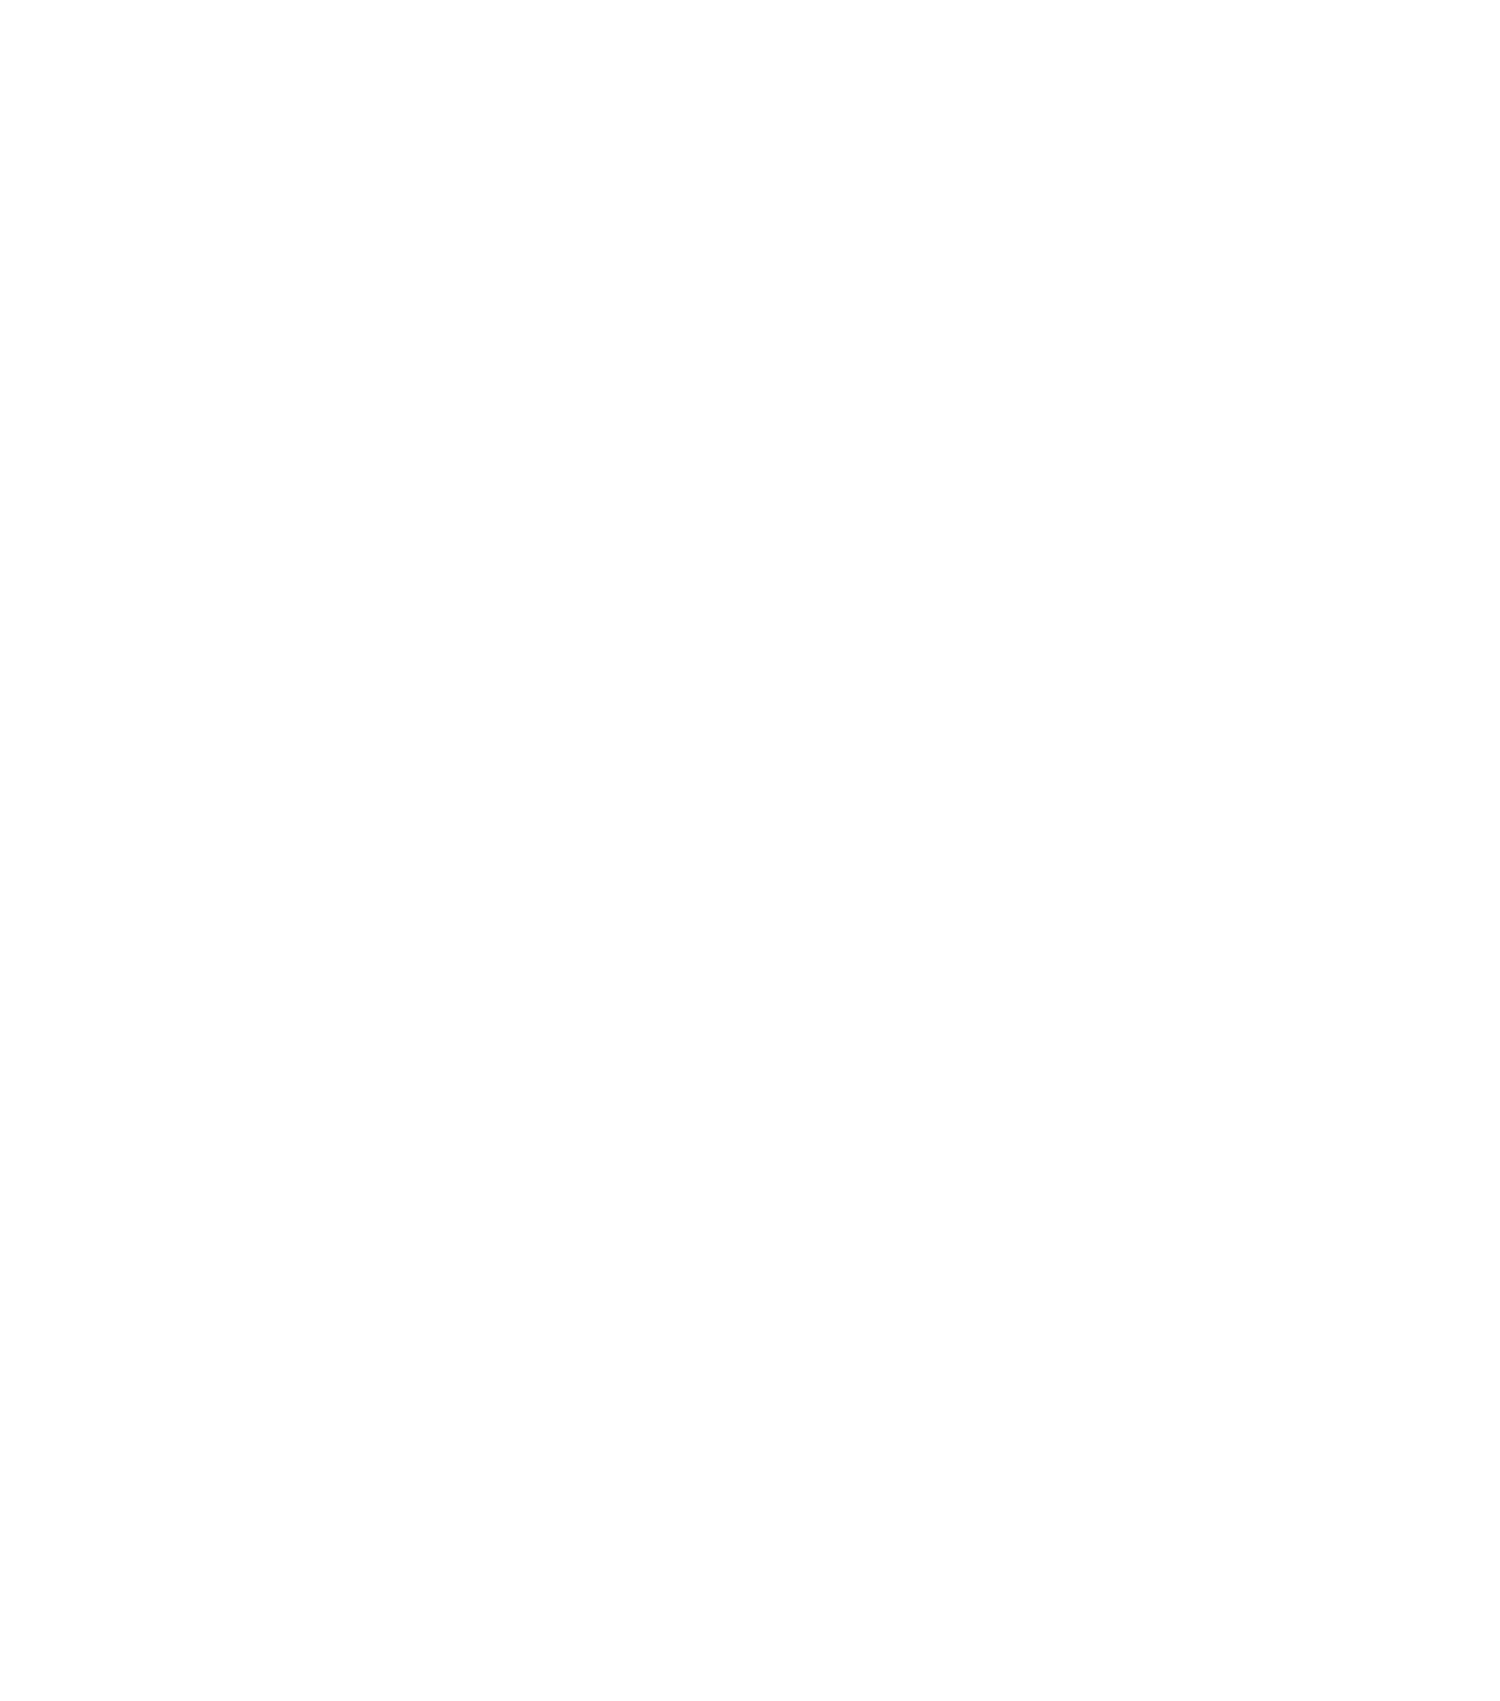 Webs of Well-being